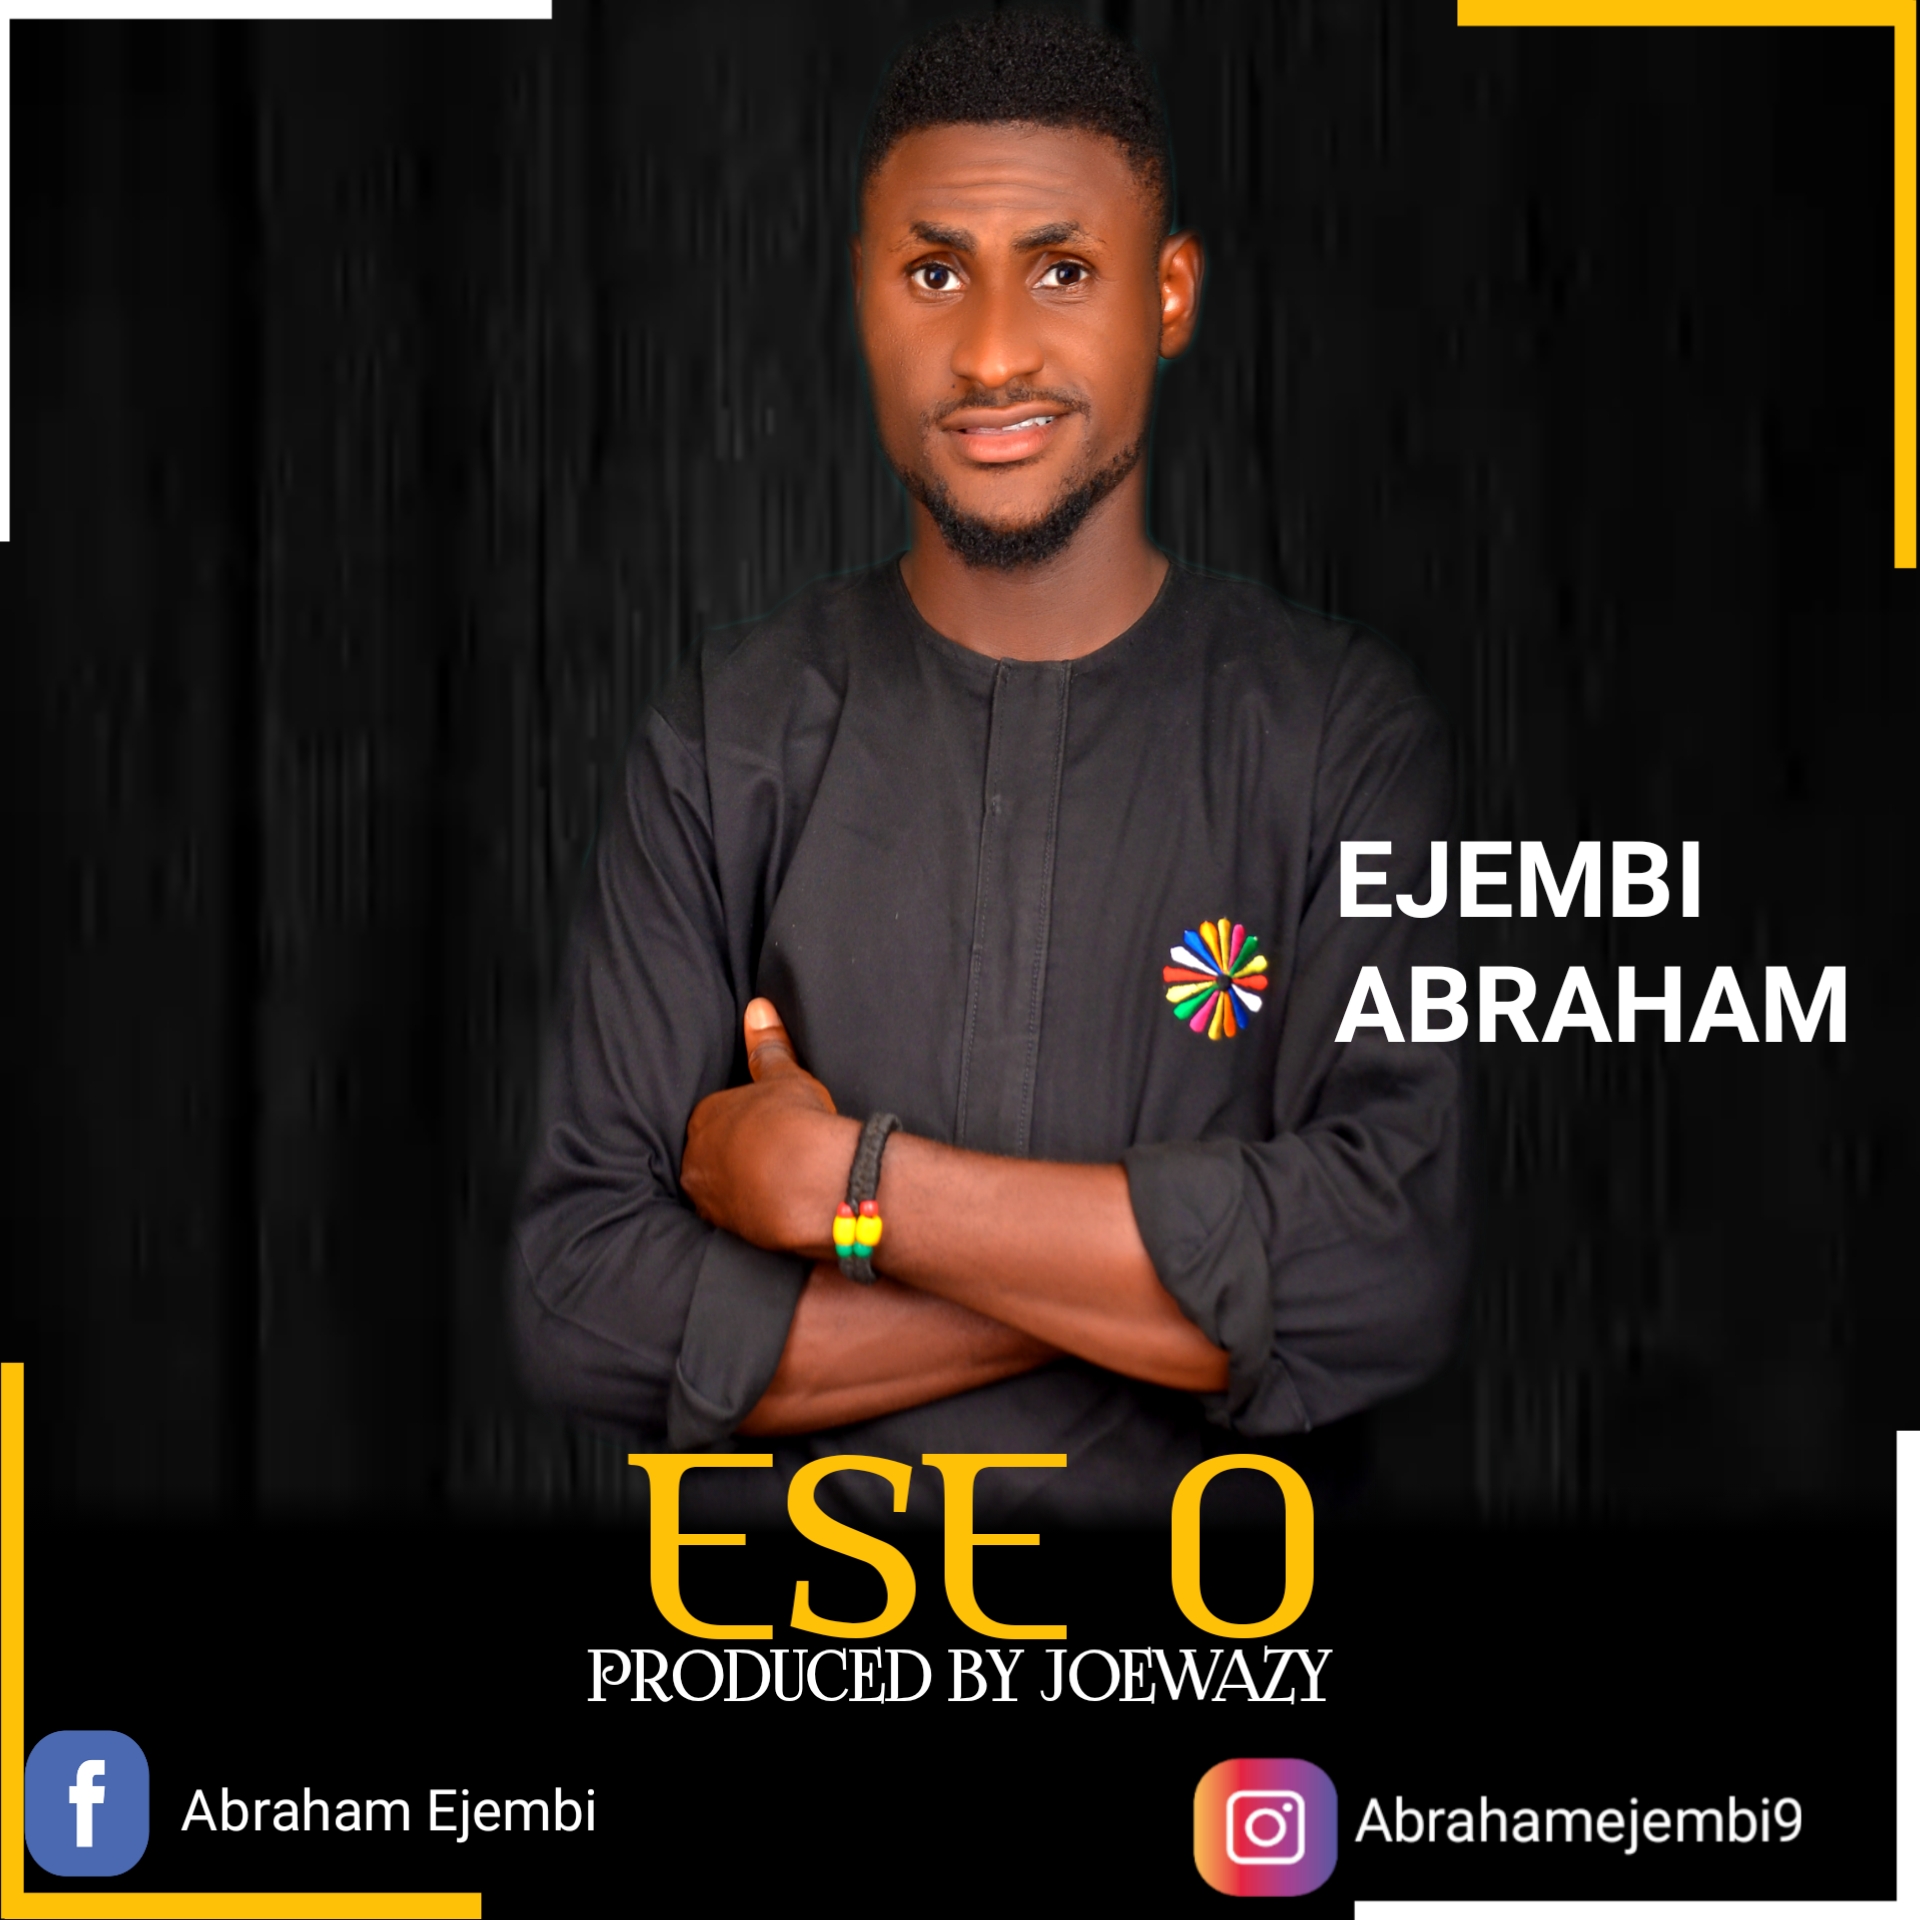 [New Release] Download ESE O by EJEMBI ABRAHAM 15